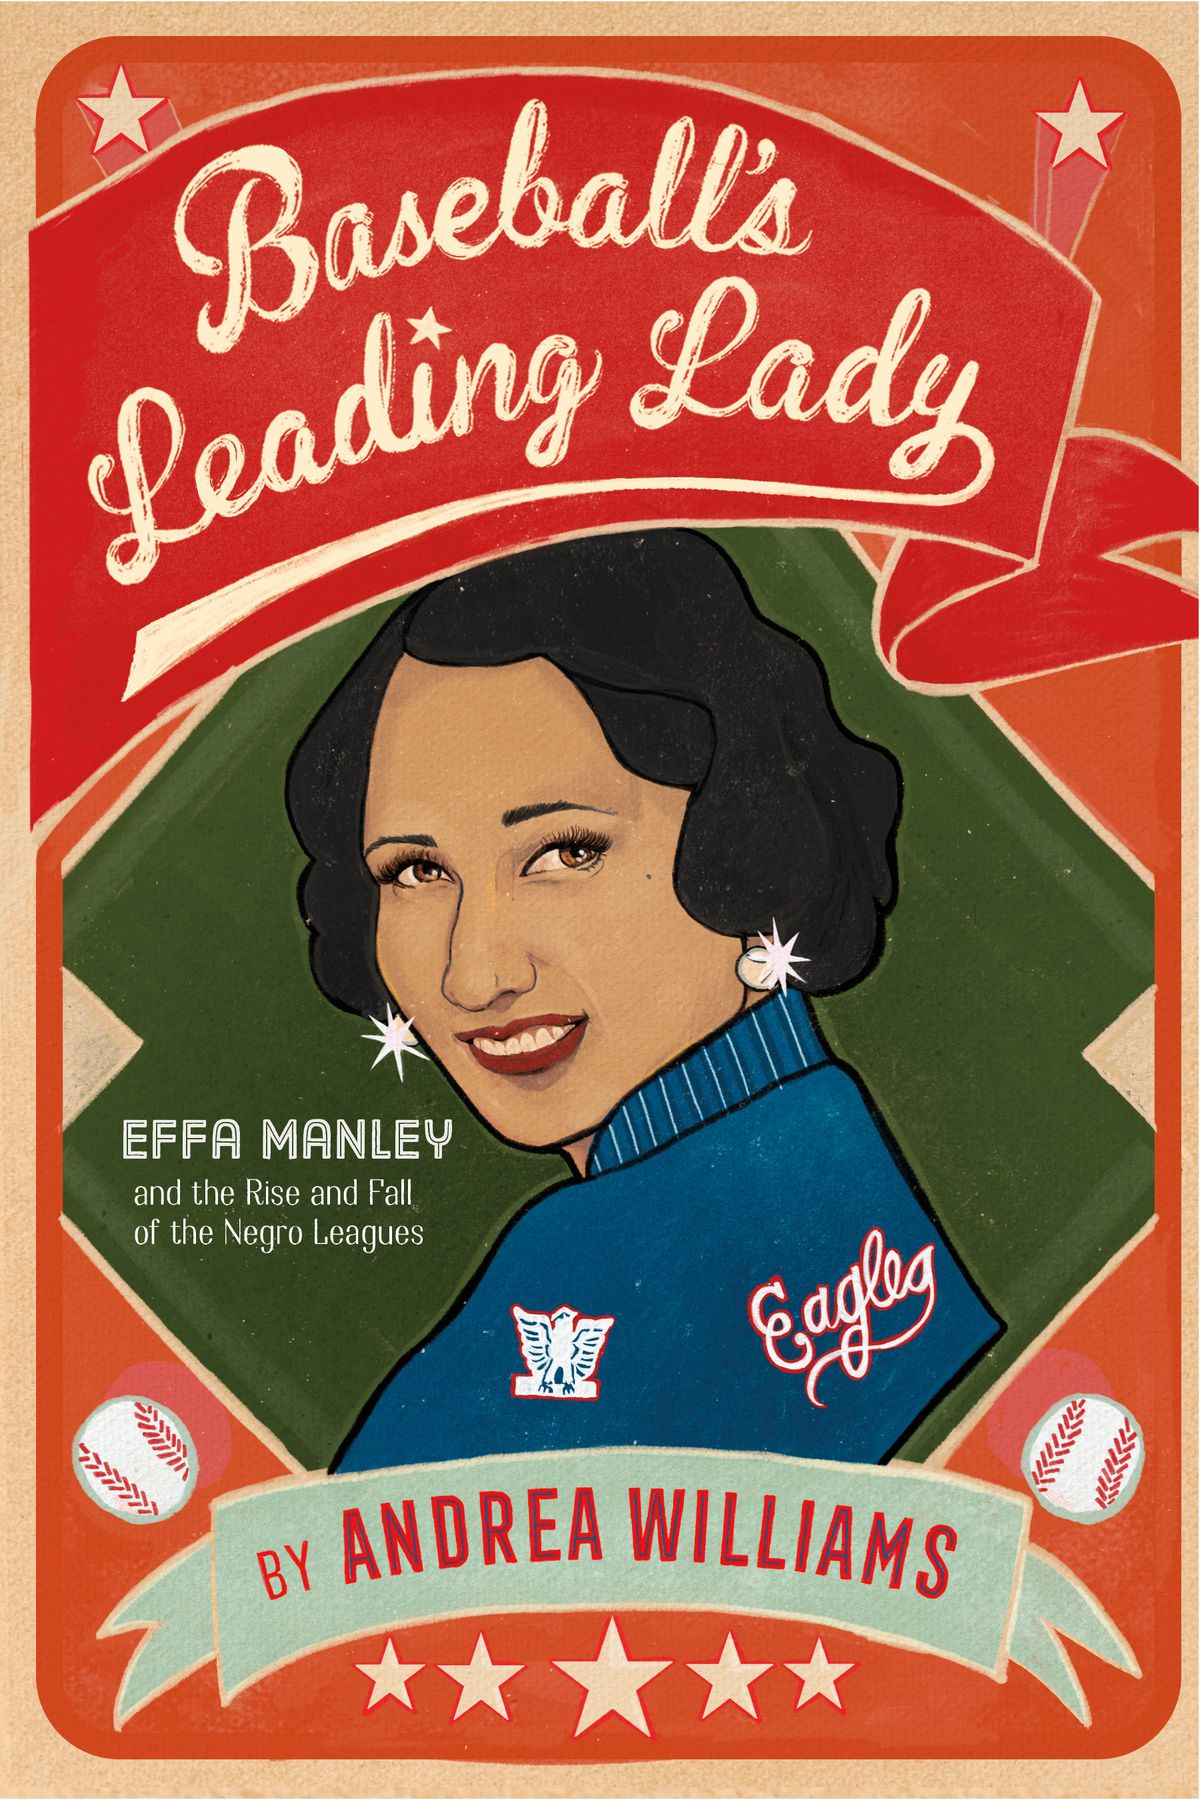 The cover of “Baseball’s Leading Lady: Effa Manley and the Rise and Fall of the Negro Leagues.”